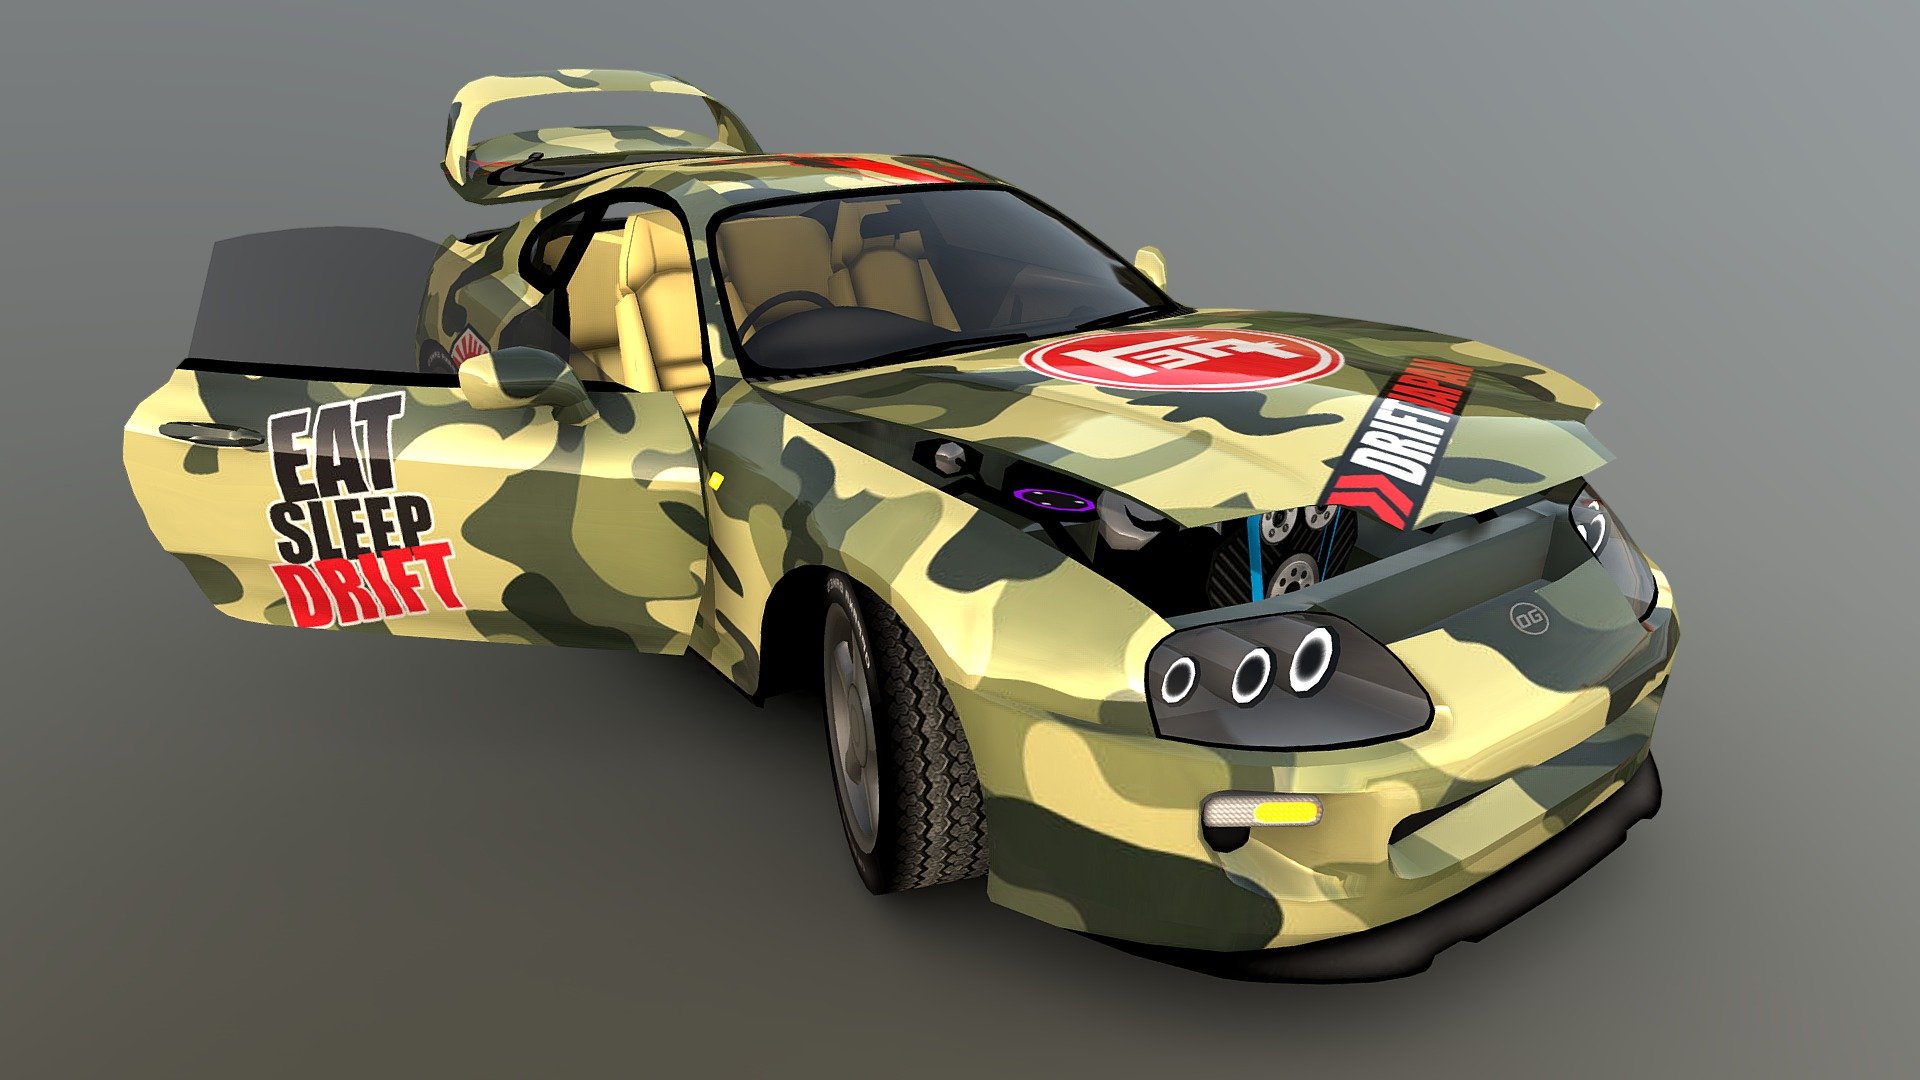 Low poly model for mobile game with interrior and moving parts
23 objects
10.7k verts
18k triangles
11.1k polygons
Textures 256x256 to 2048x2048
Created in blender3d 2021, Photoshop 2021 - Toyota Supra A80 - 3D model by OG Cars (@zigzag977010) 3d model